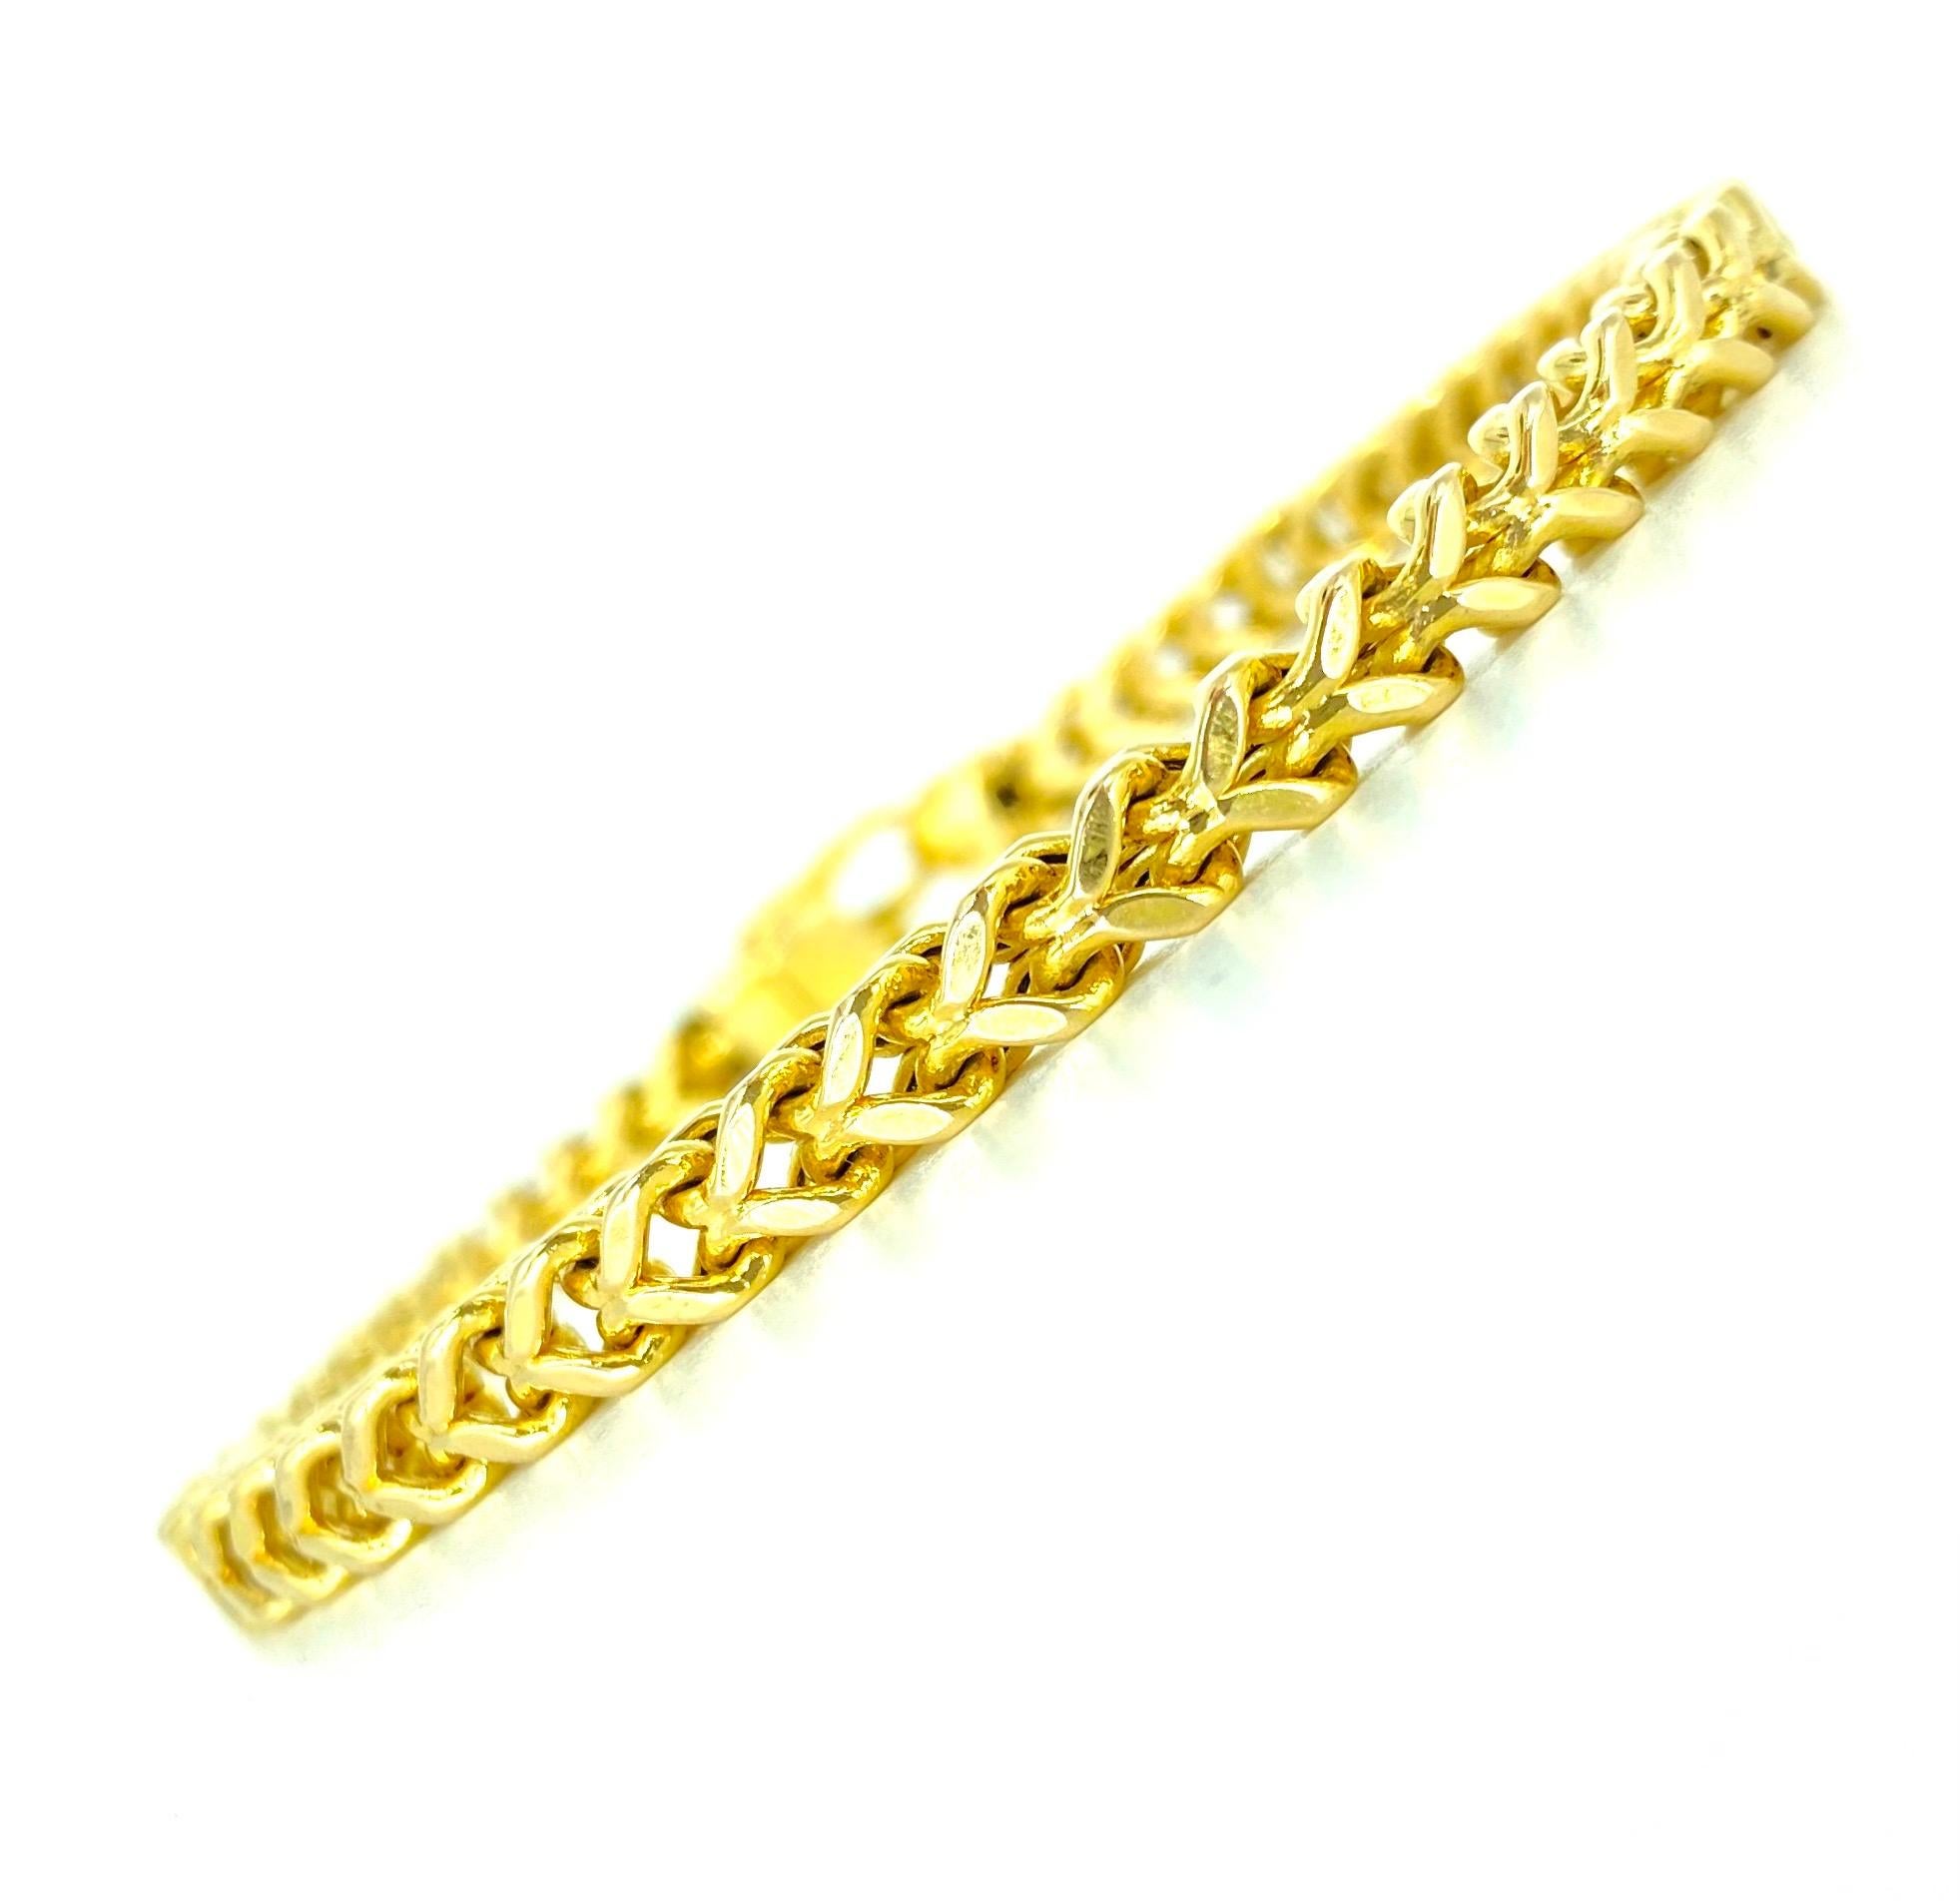 Vintage 5mm Franco Link Bracelet 14k Gold.
Very impressive bracelet Franco link. The closure on this bracelet has a rotatable attachment to the lobster lock that lets you feel comfortable while wearing. The bracelet weights 14.7 grams and is made of